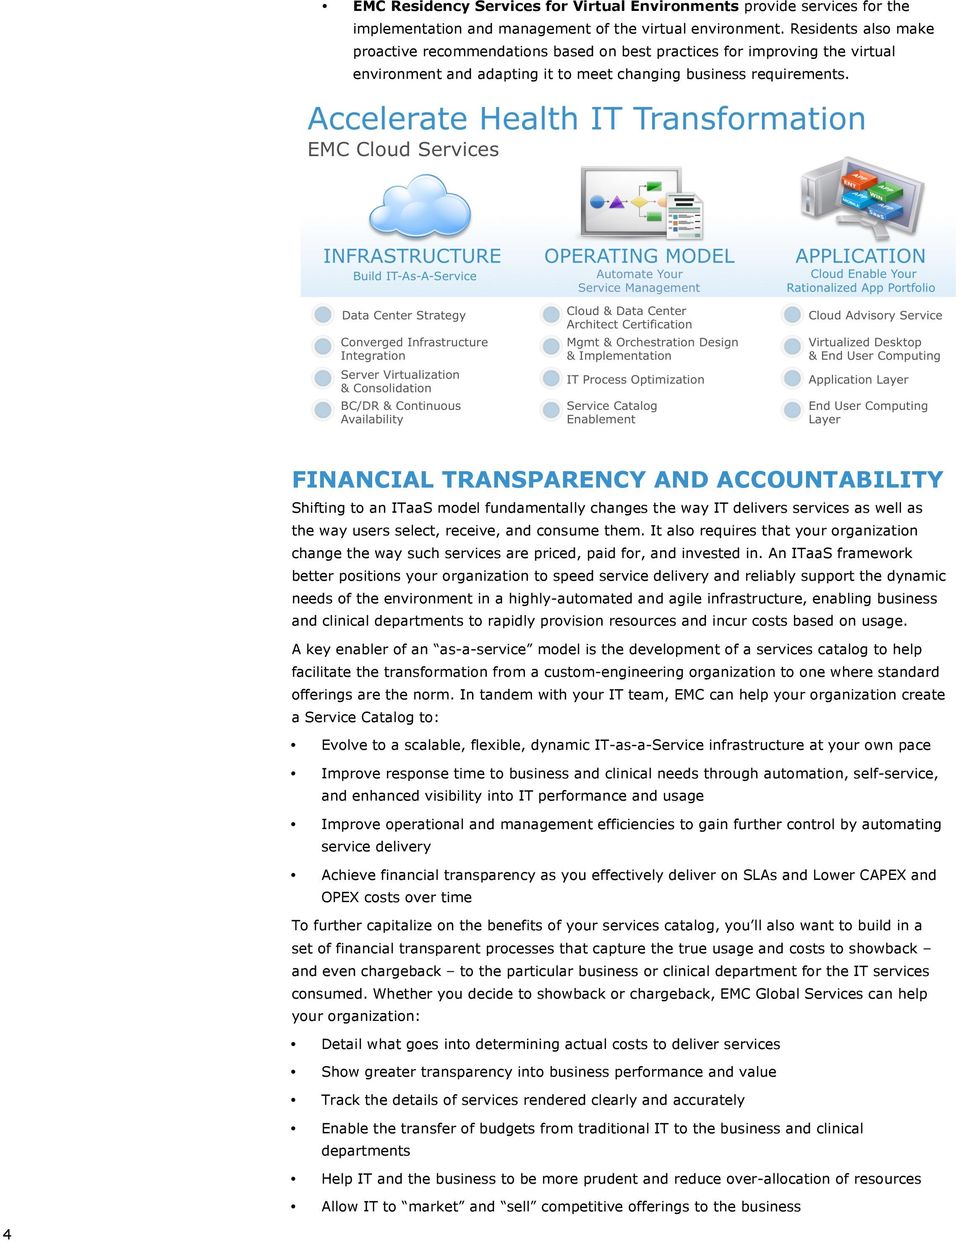 FINANCIAL TRANSPARENCY AND ACCOUNTABILITY Shifting to an ITaaS model fundamentally changes the way IT delivers services as well as the way users select, receive, and consume them.